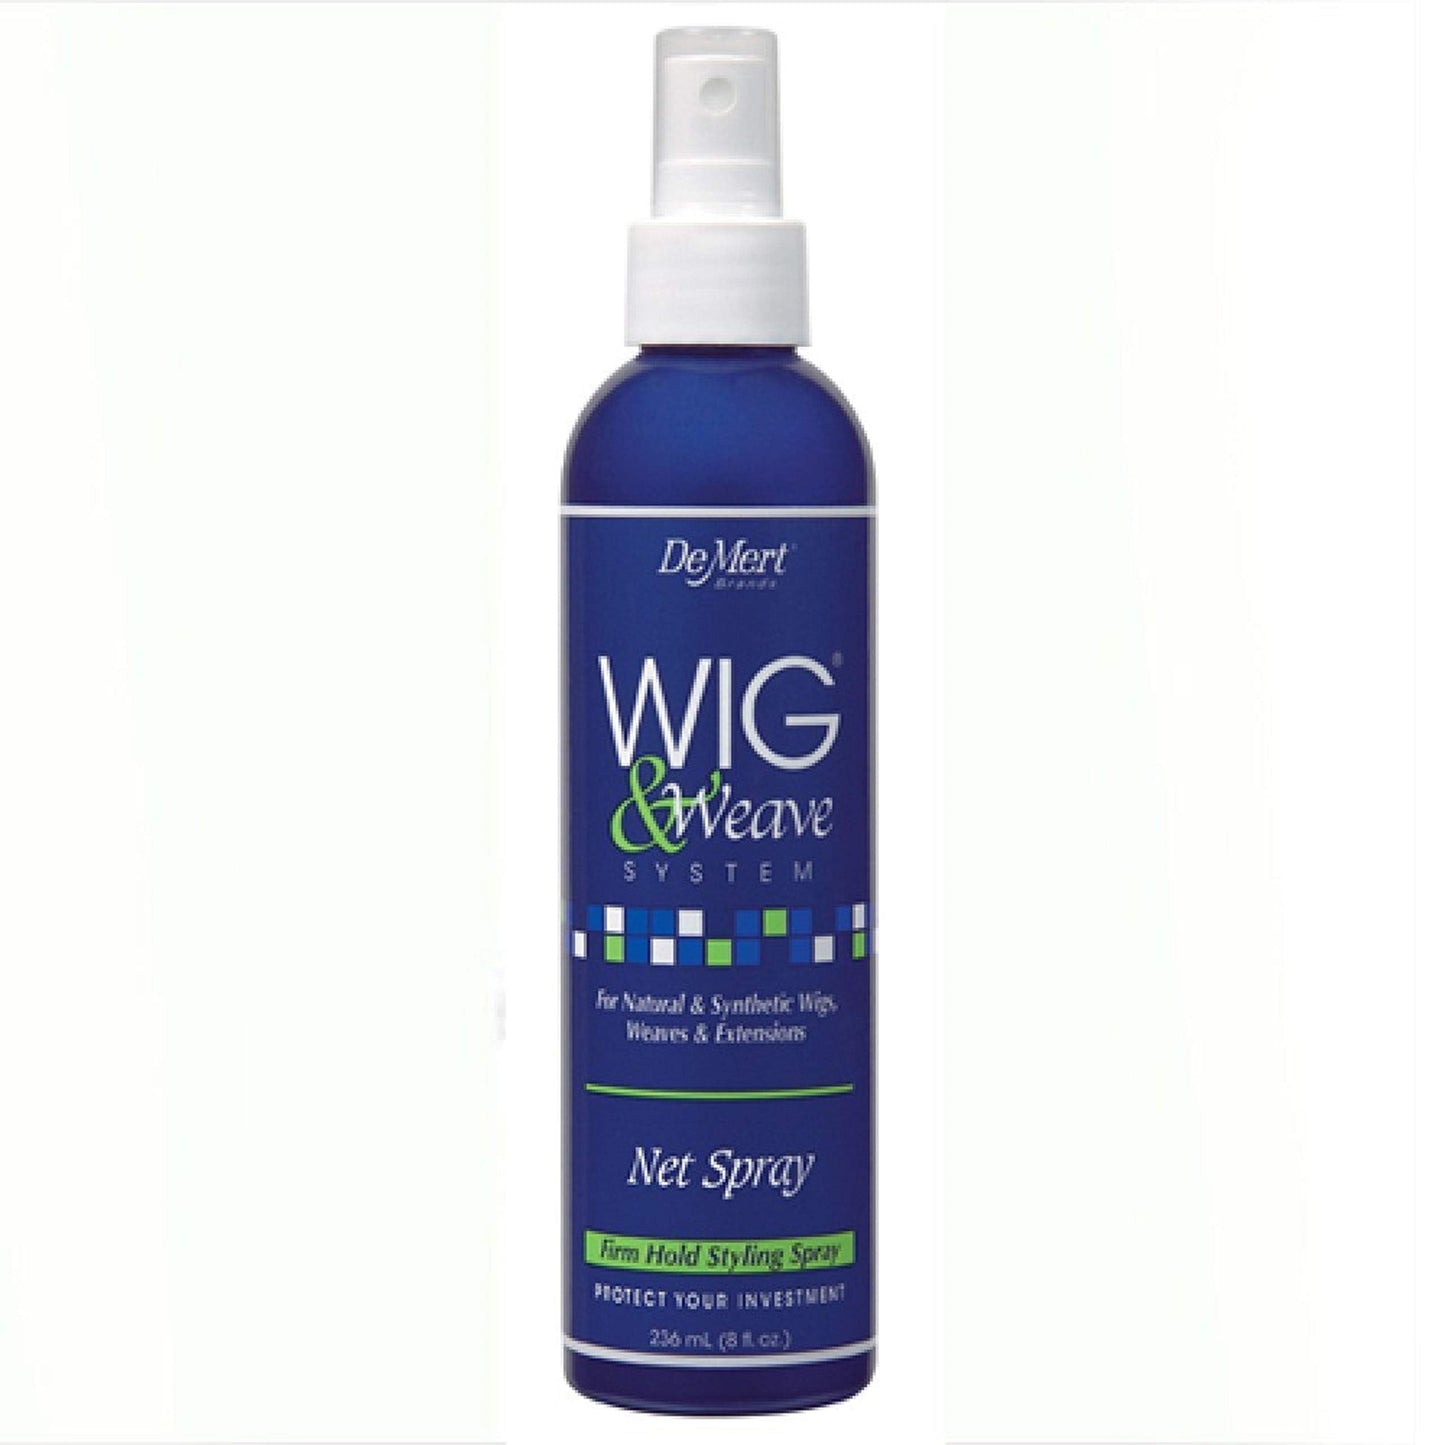 Demert Wig & Weave System Products